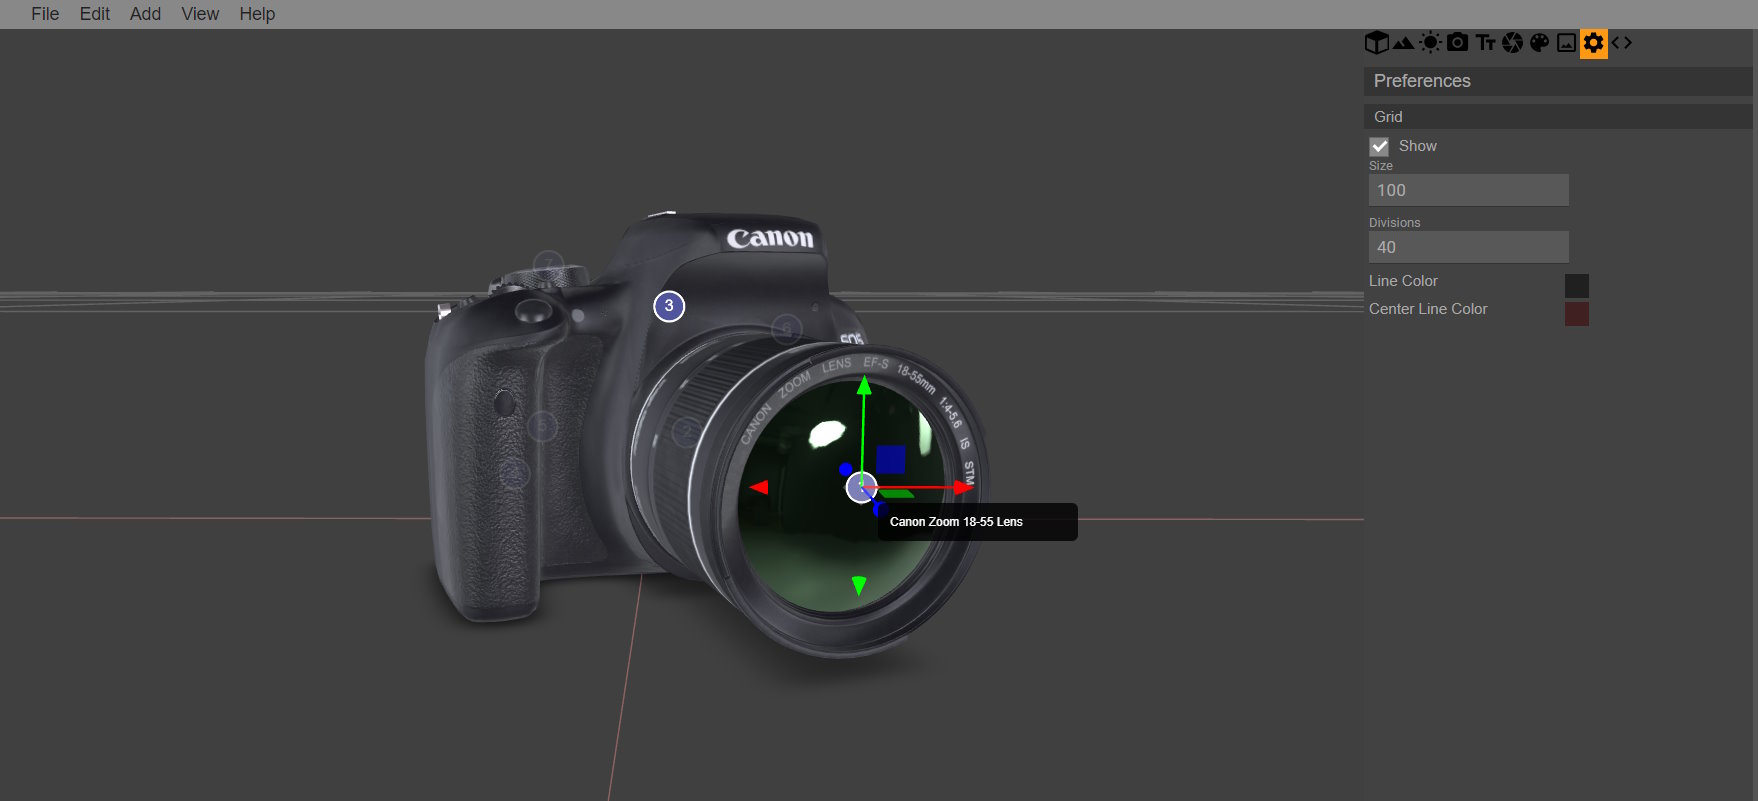 3D viewer and scene editor